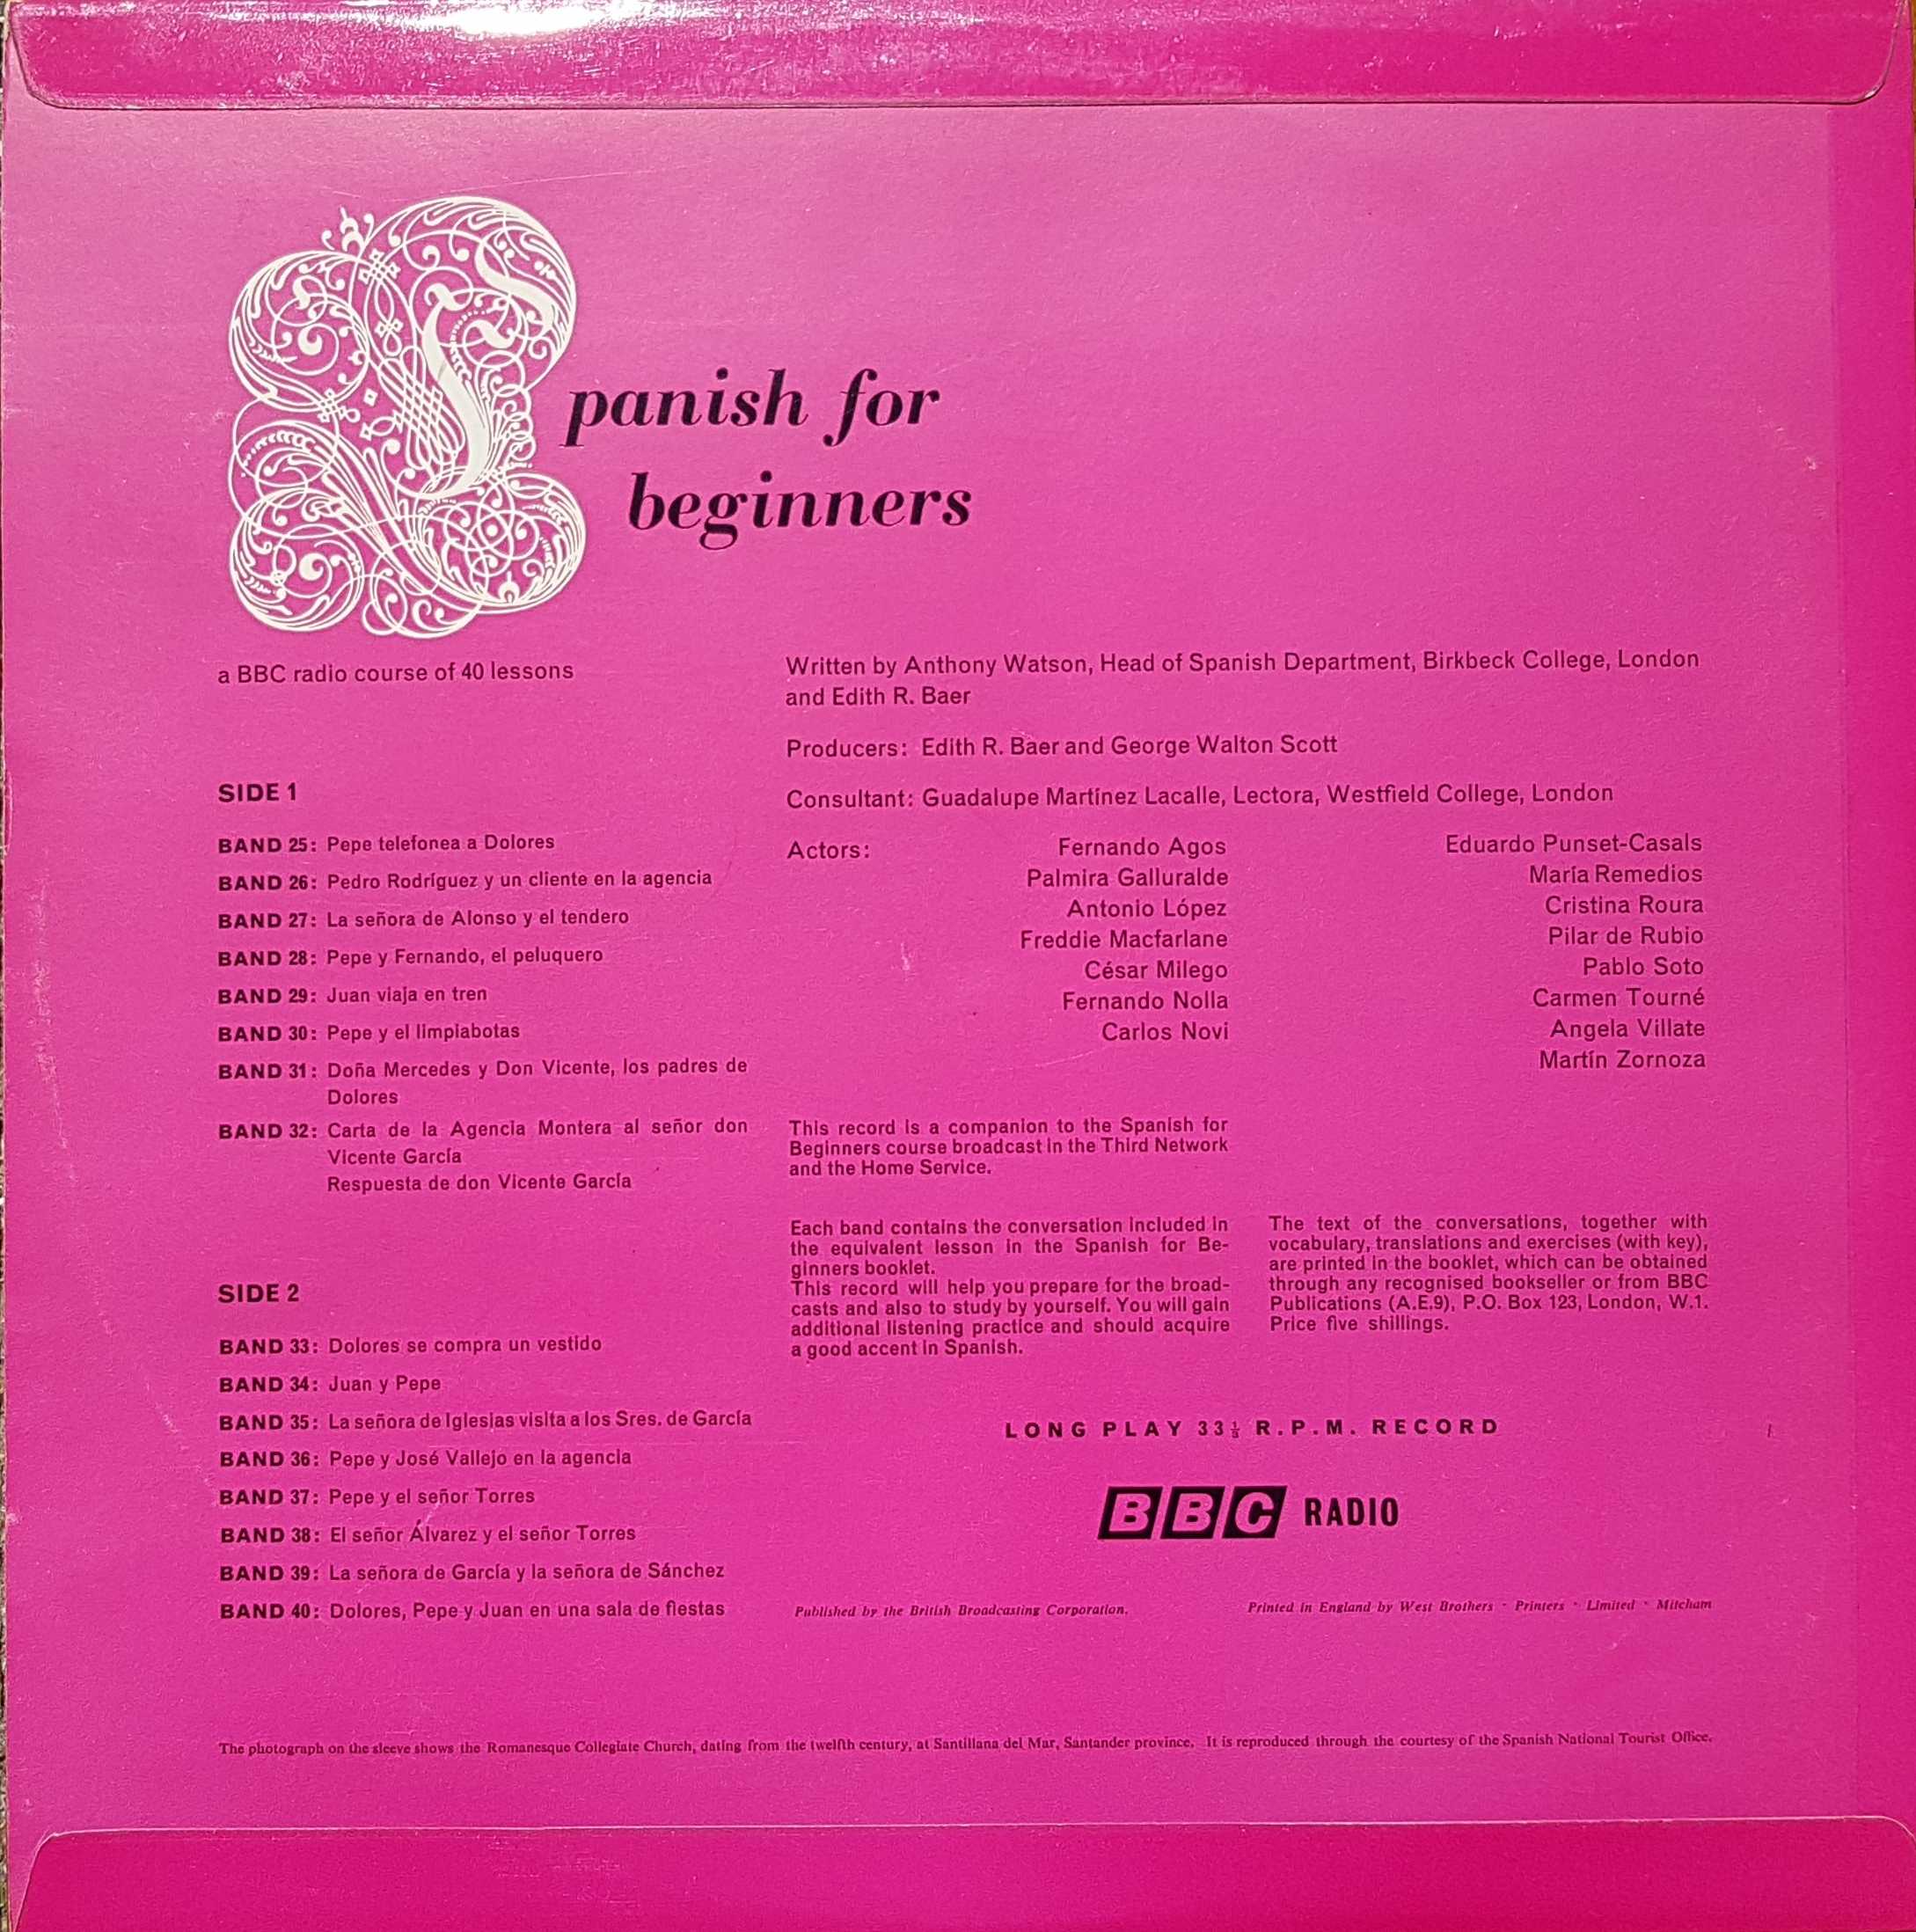 Picture of OP 27/28 Spanish for beginners - Parts 25-40 by artist Anthony Watson / Edith R. Baer from the BBC records and Tapes library